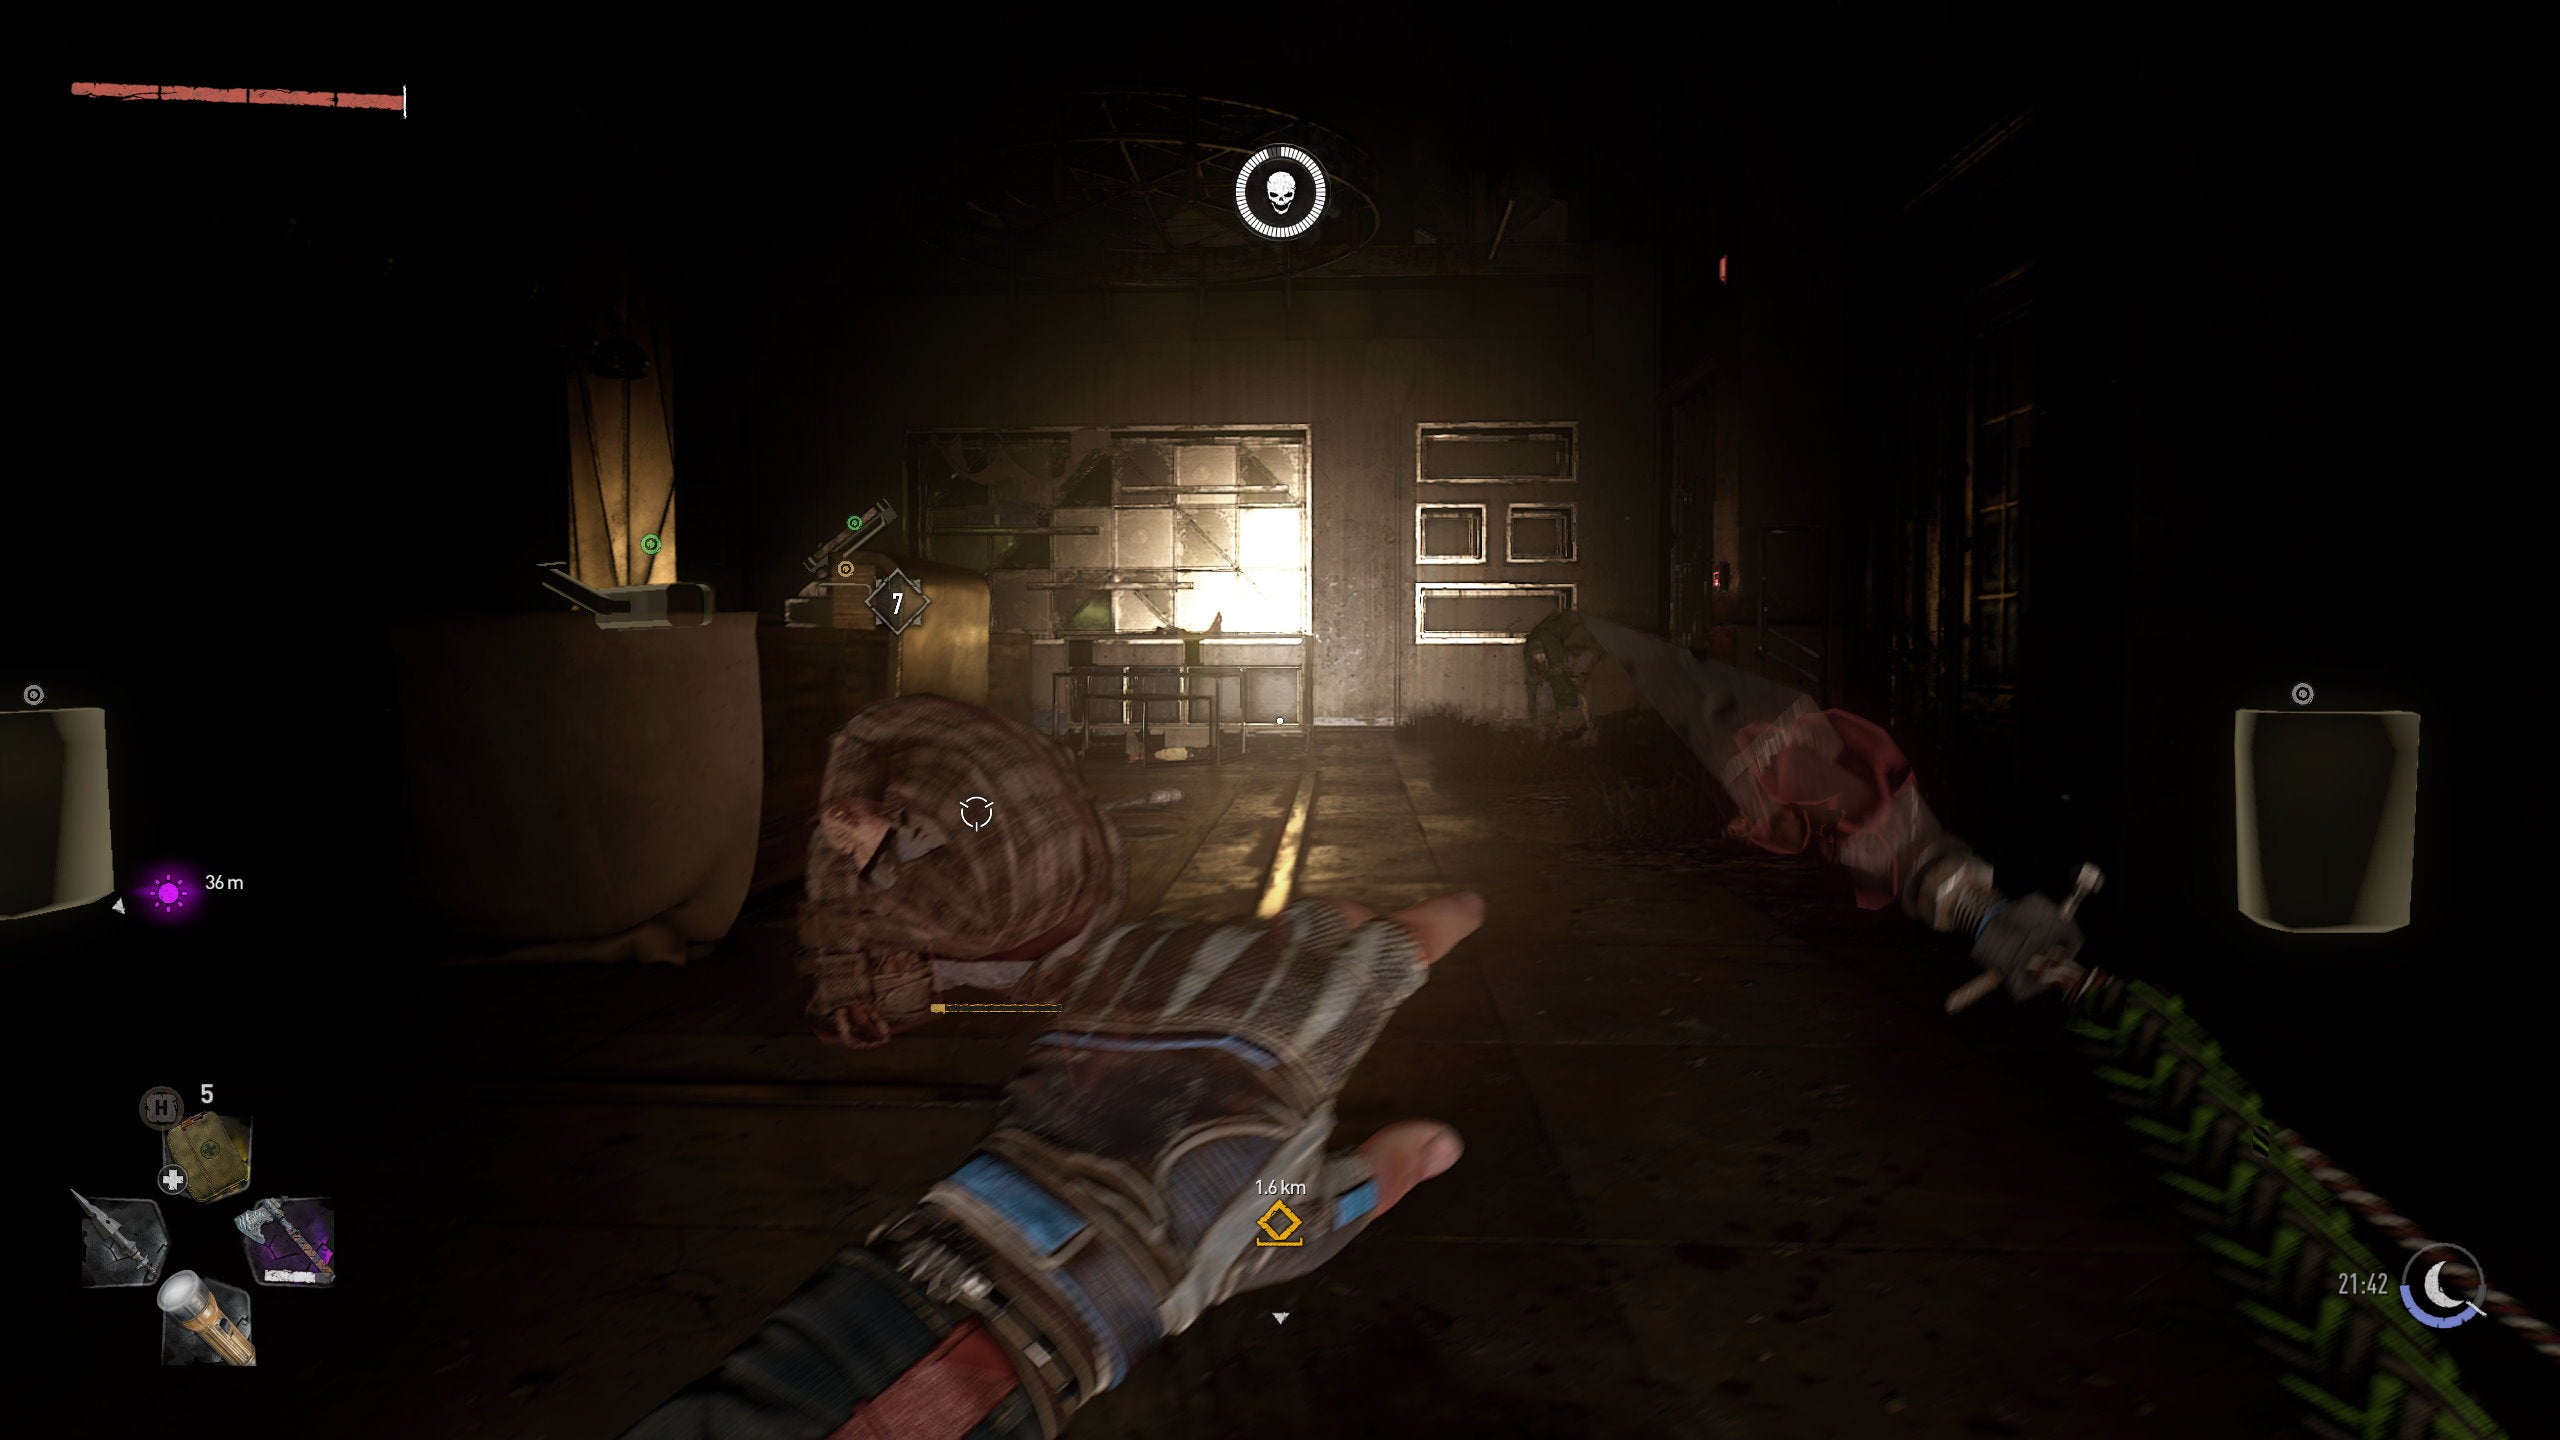 The player encounters two zombies crouched on the floor in a dark room in Dying Light 2